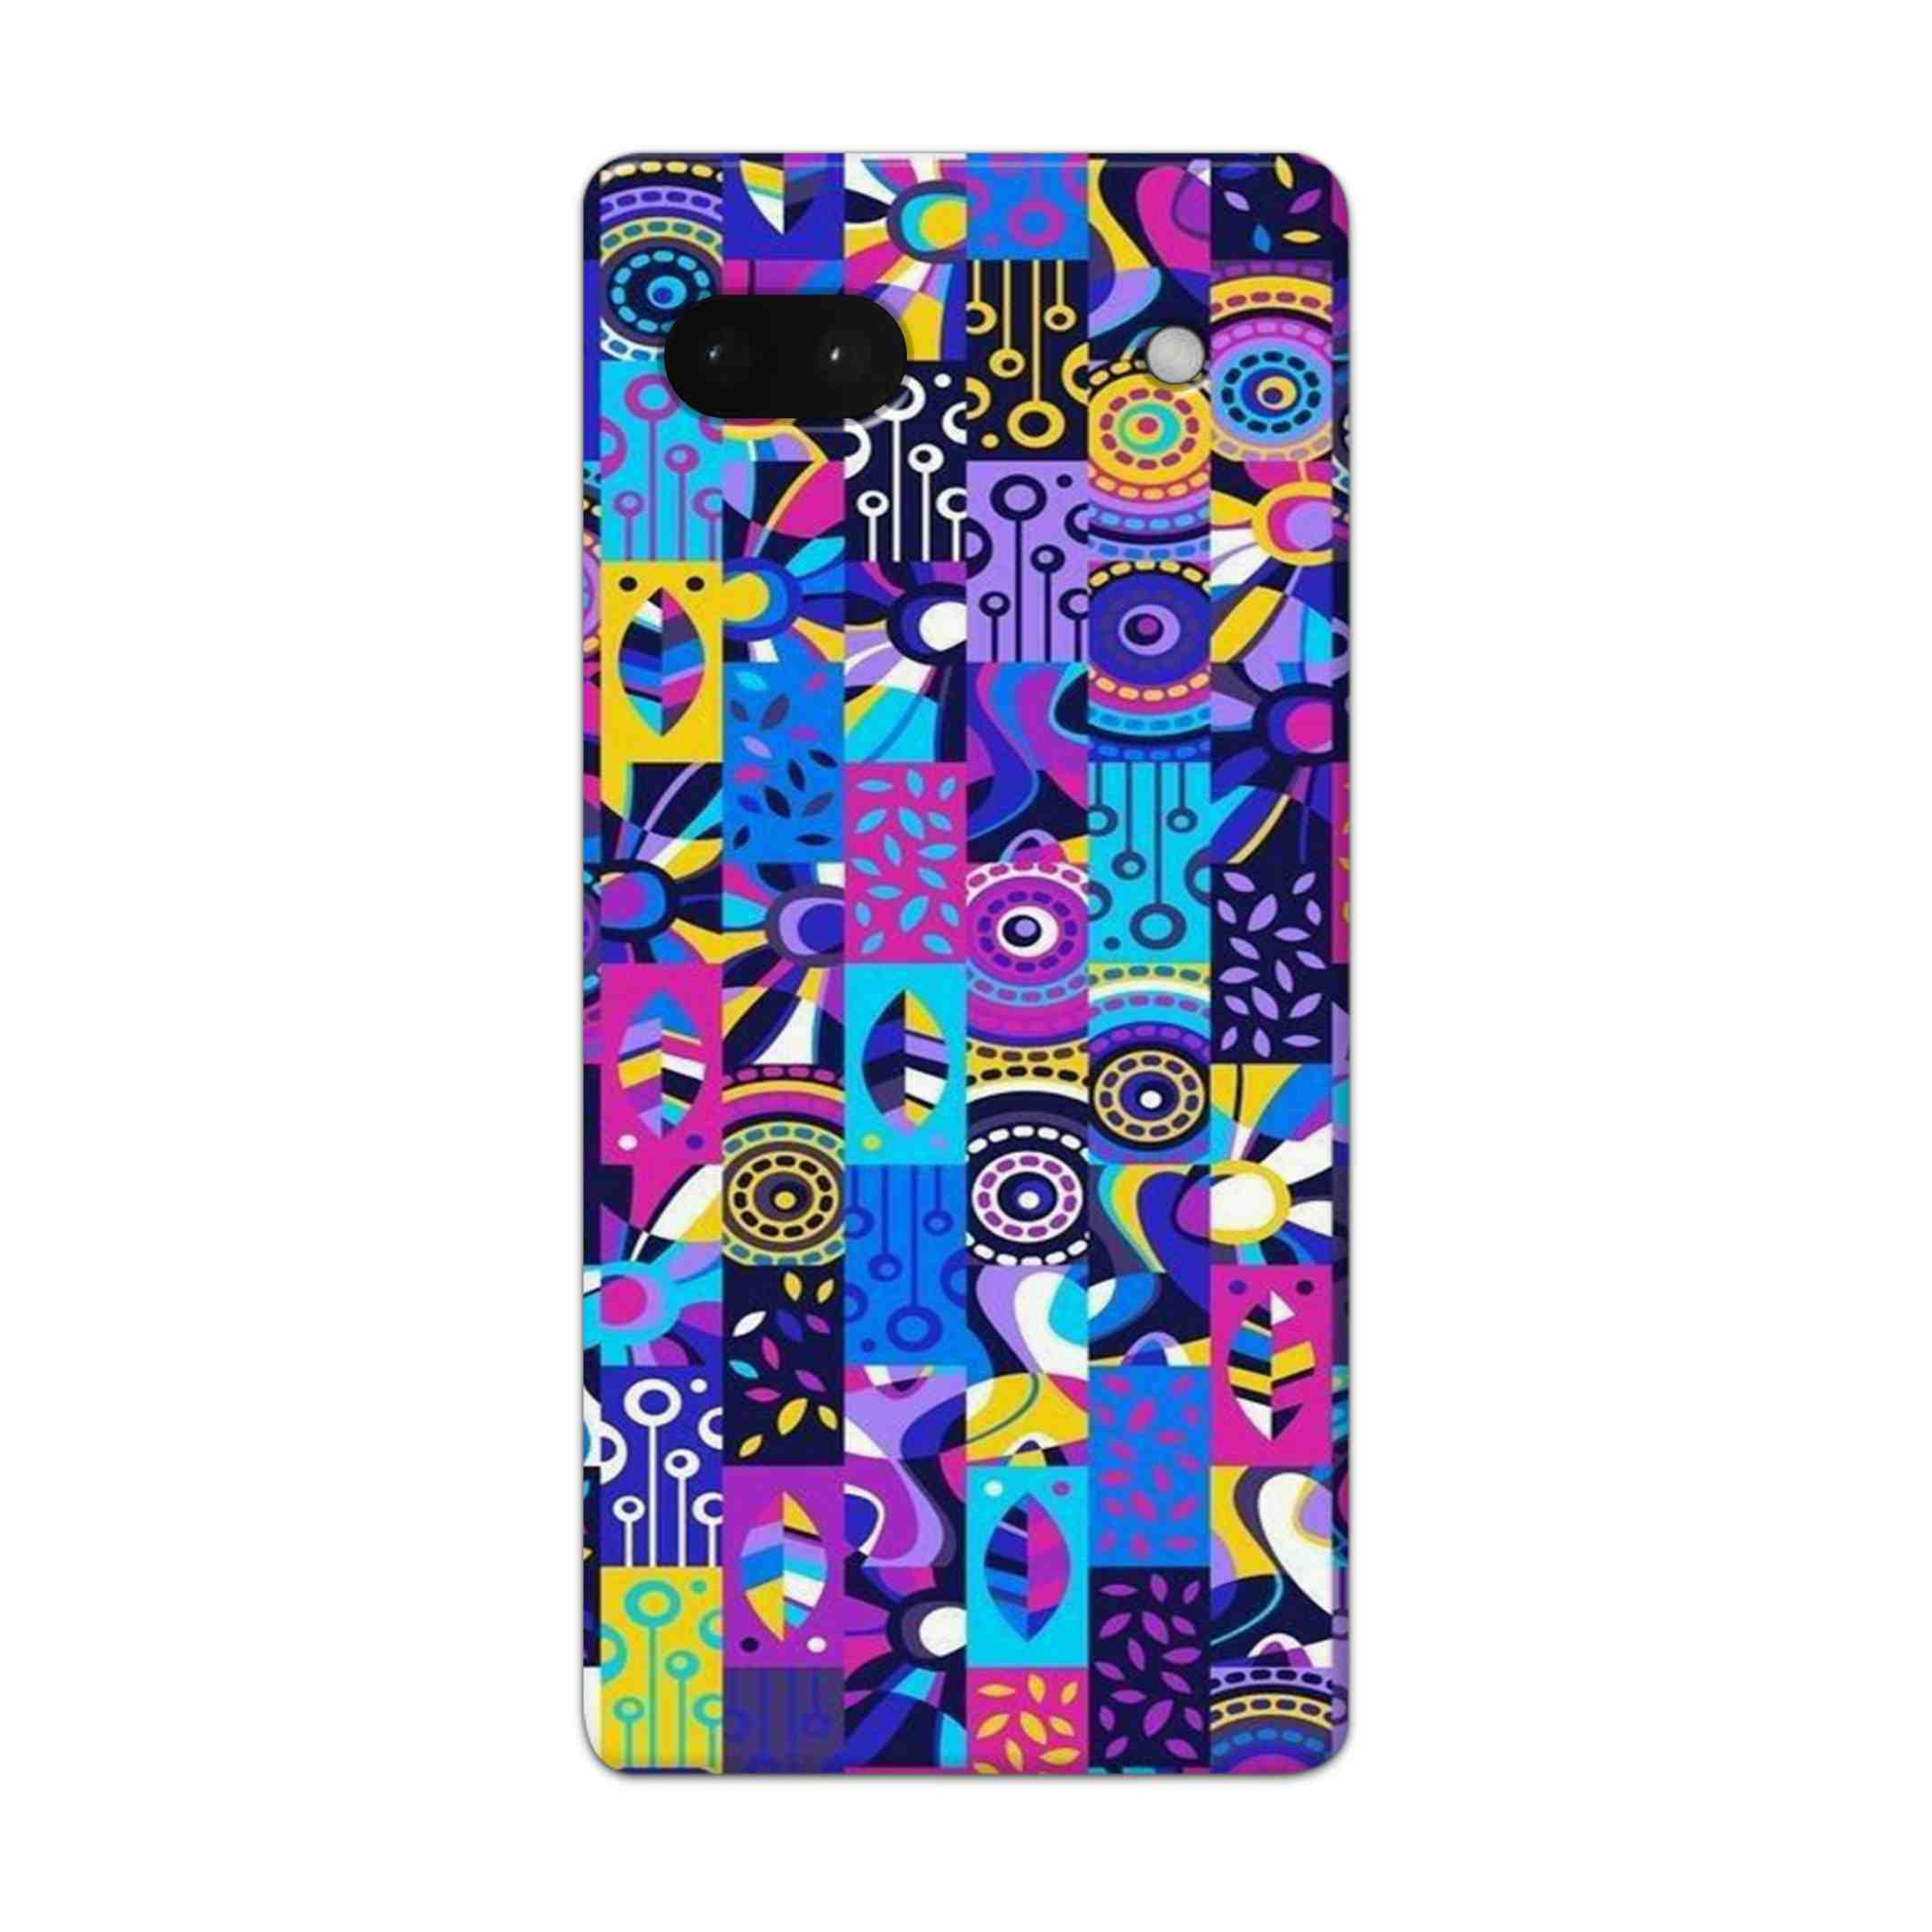 Buy Rainbow Art Hard Back Mobile Phone Case Cover For Google Pixel 6a Online